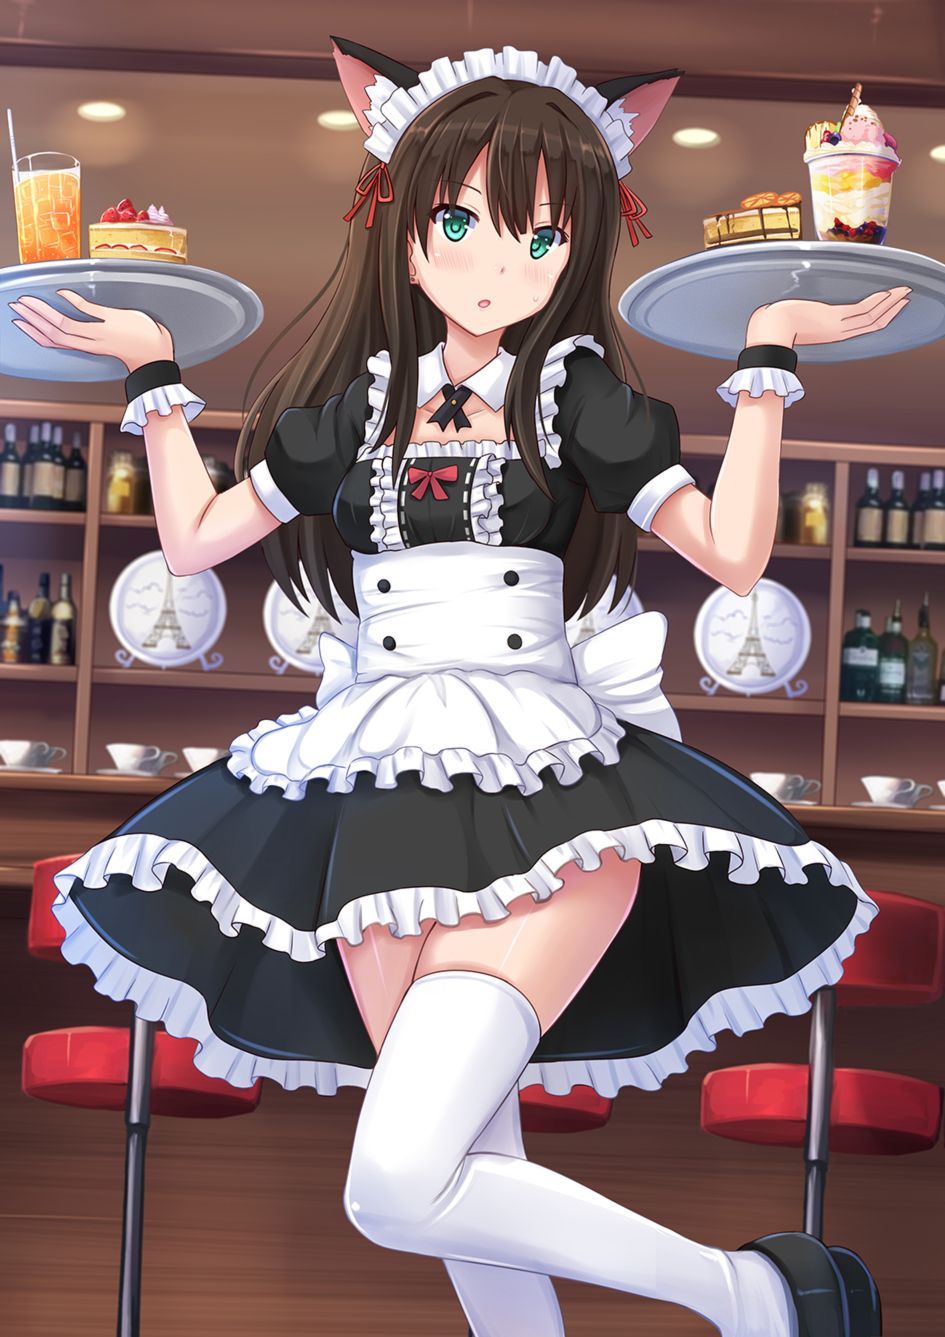 Take a picture of the lovely maid, (secondary / ZIP) instinctively want to hit will be 24